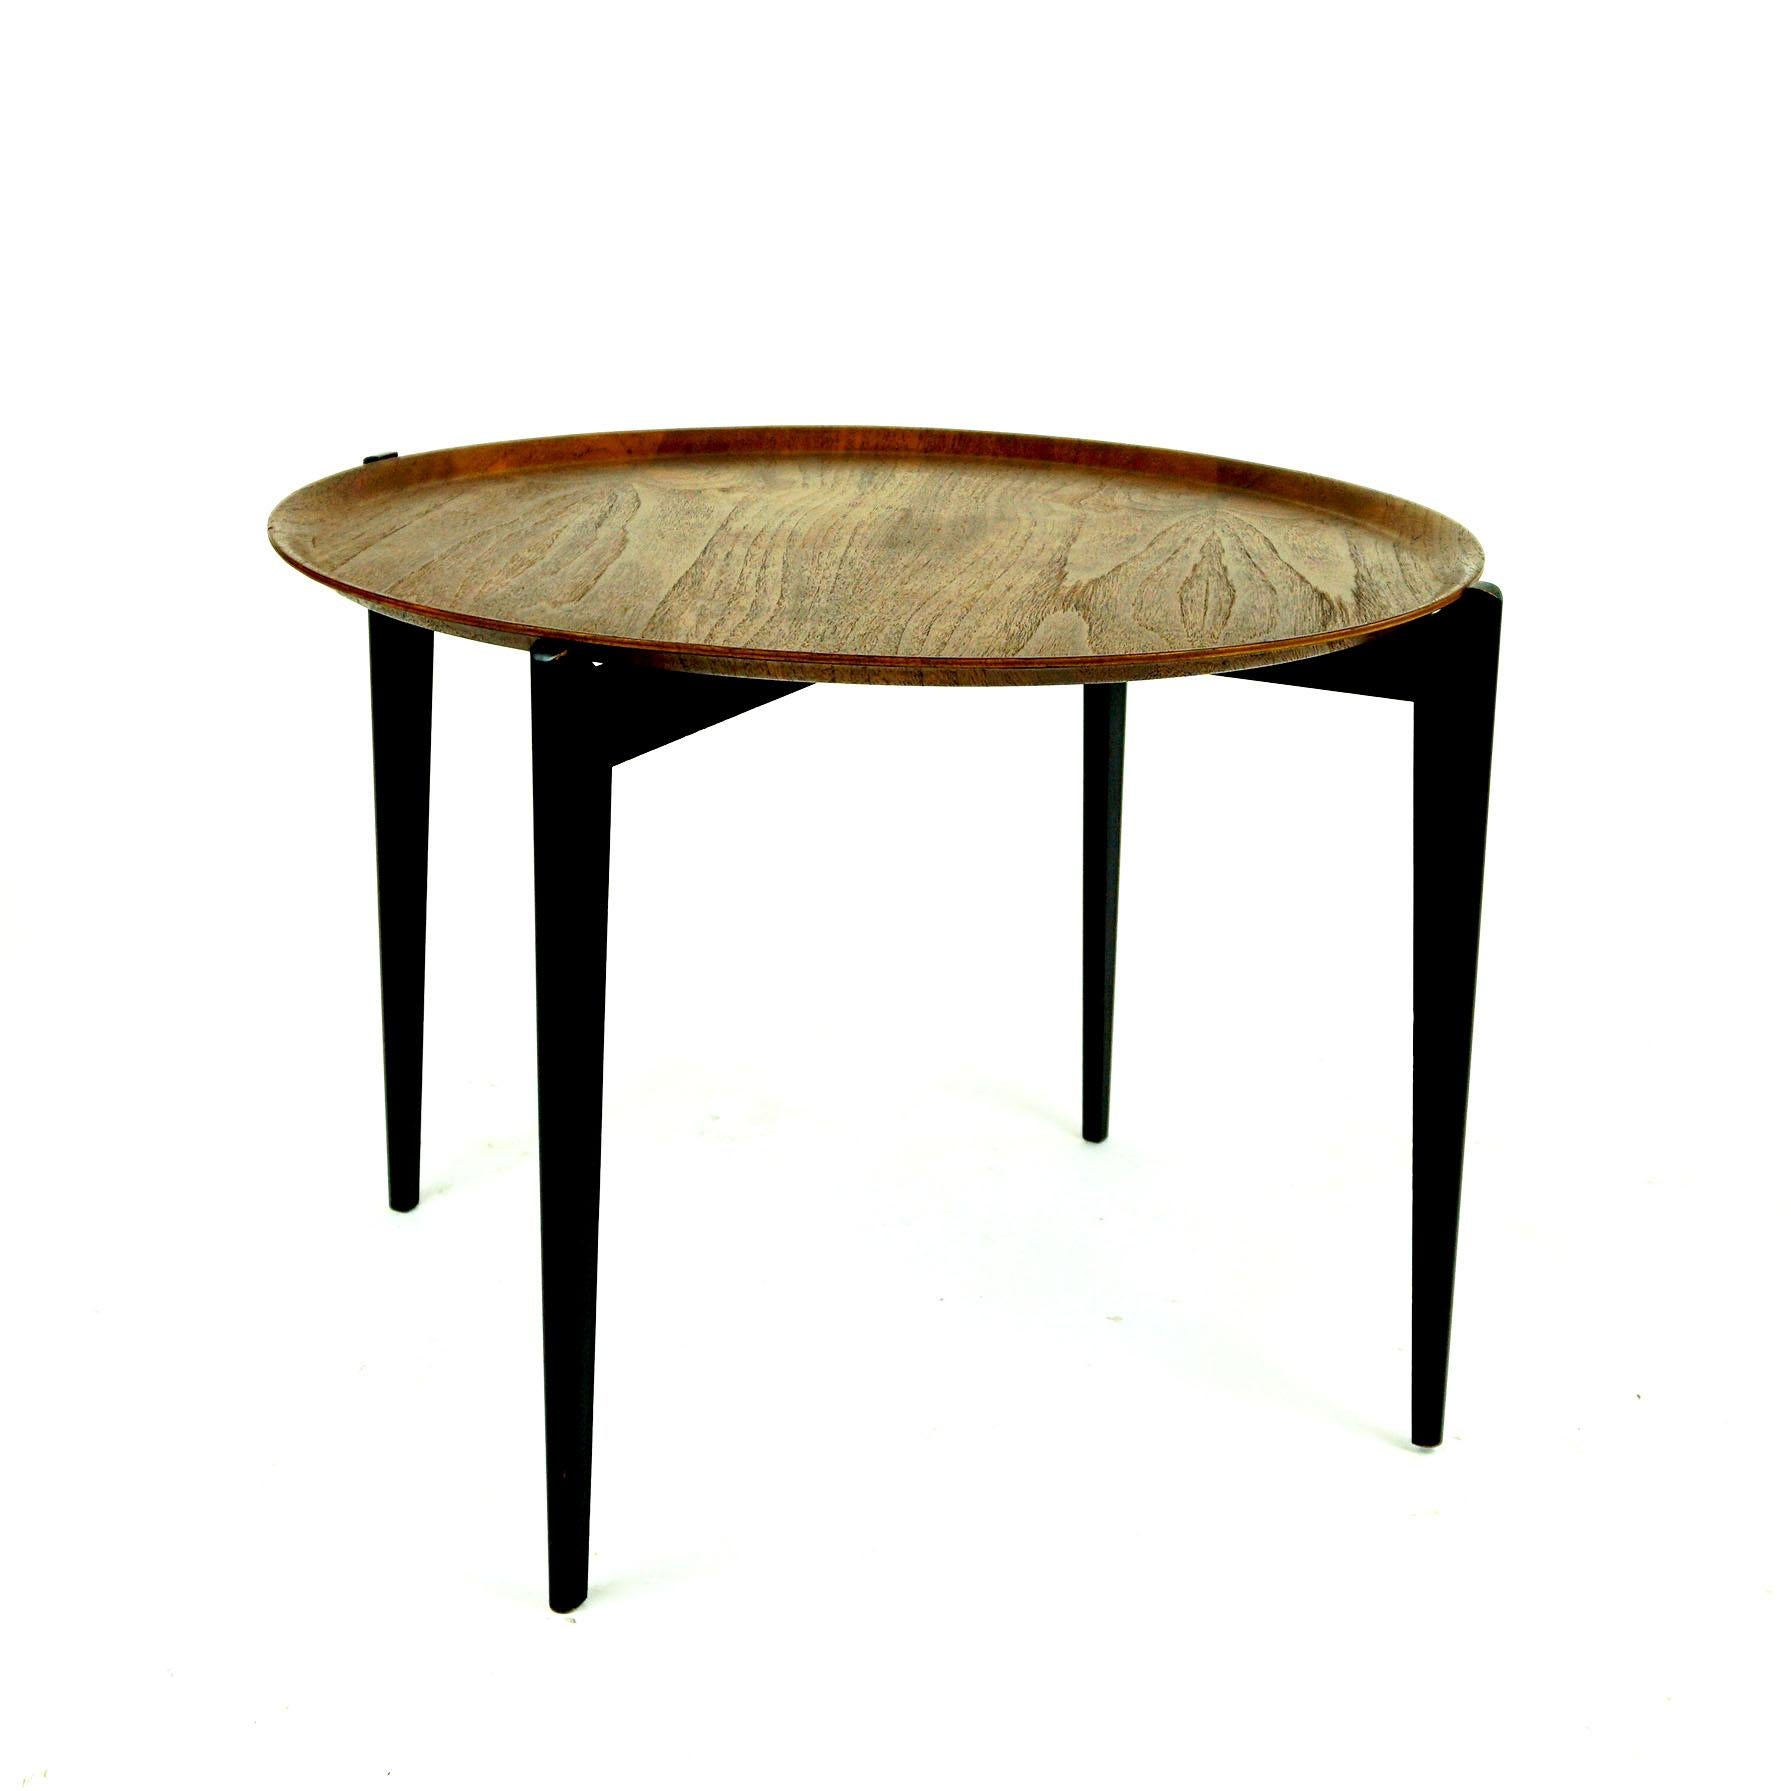 Mid-20th Century Scandinavian Modern Teak Tray Coffee Table in the Style of Willumsen and Engholm